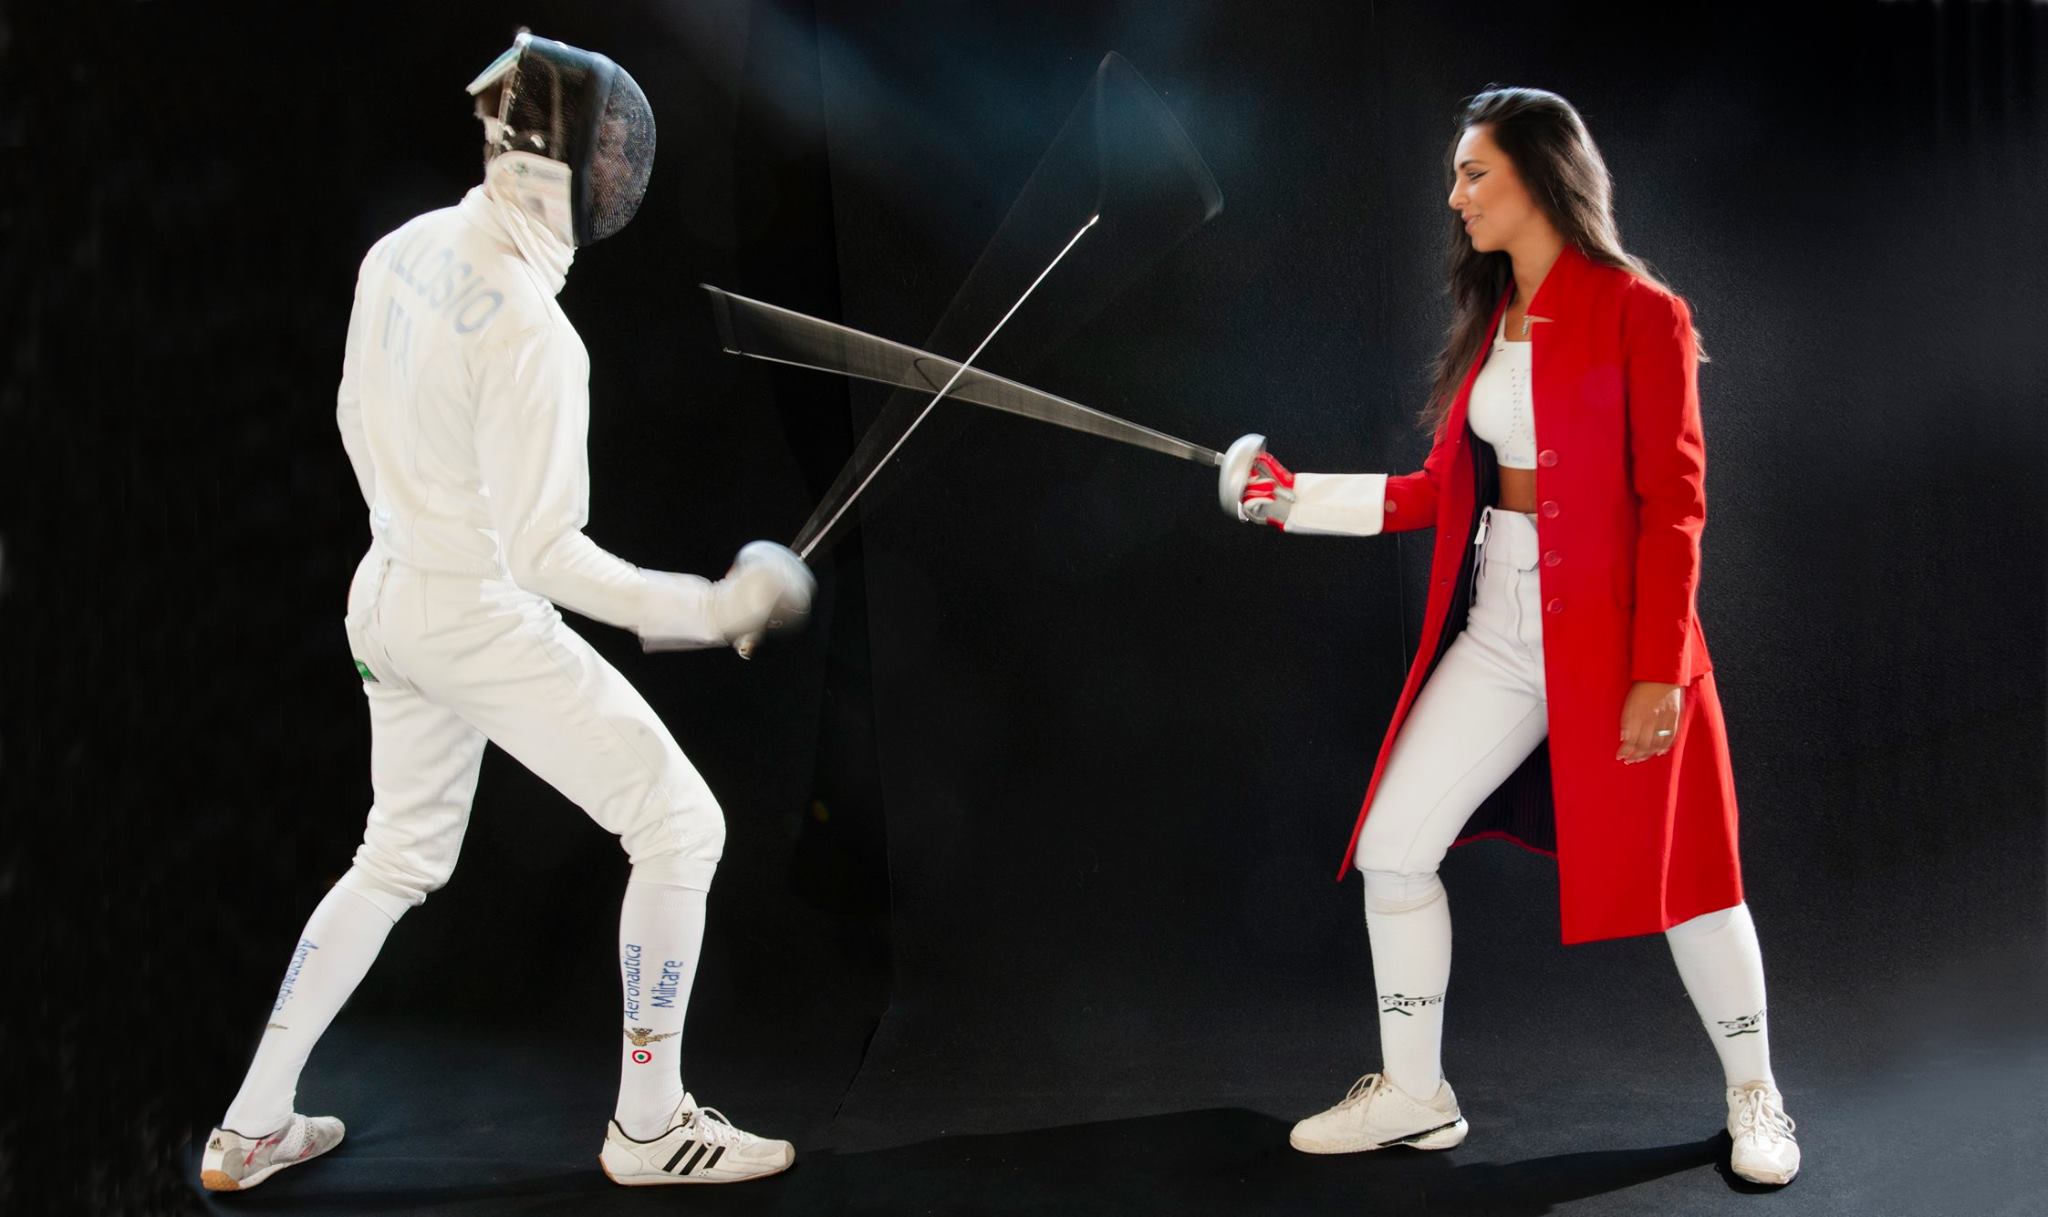 Fencing-&-Fashion-Atelier-Beaumont